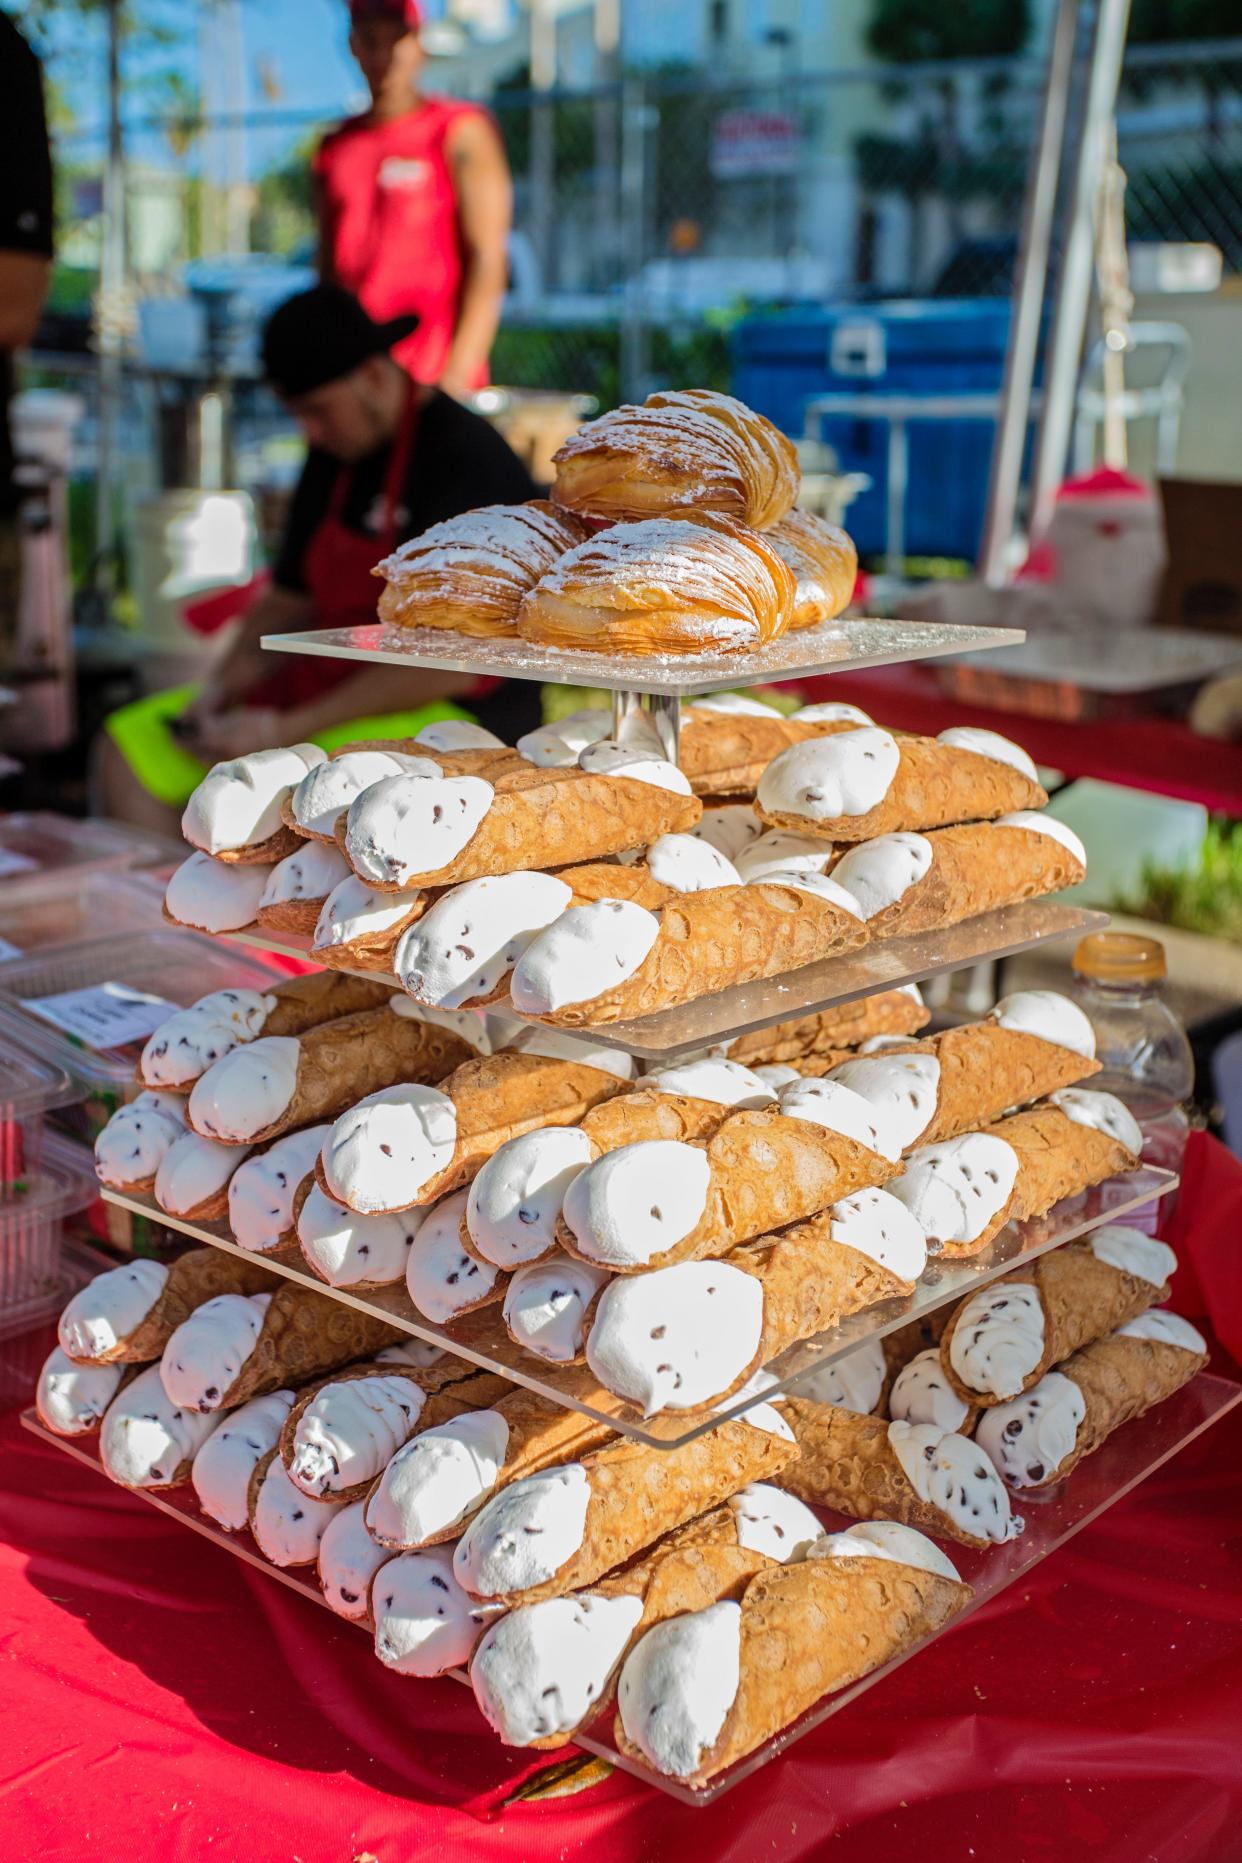 Entertainment, cooking demonstrations and excellent food, like this canoli stack, await at the Feast of Little Italy, Nov. 3 to 5 at Abacoa in Jupiter.